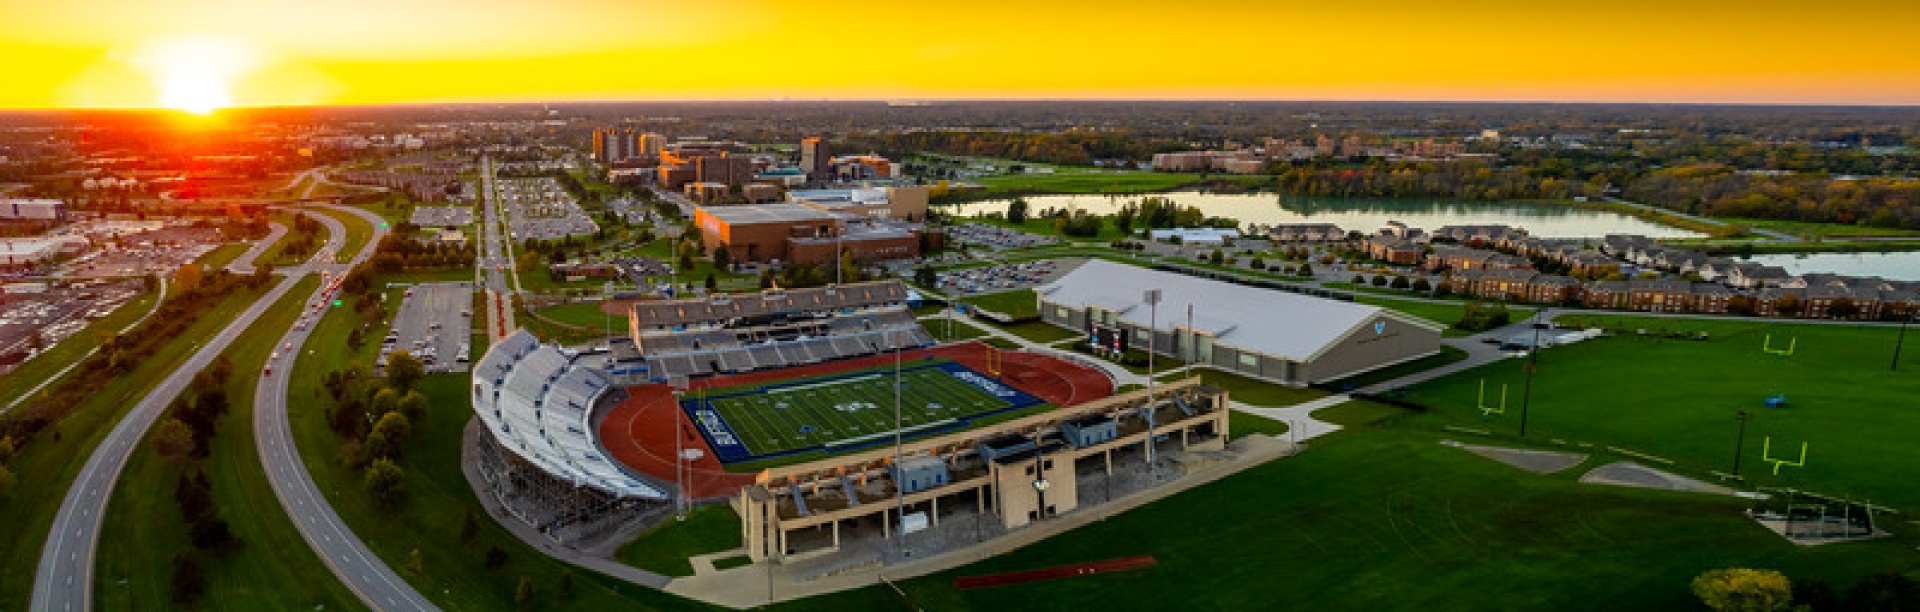 Aerial view of North Campus during a golden sunset. 